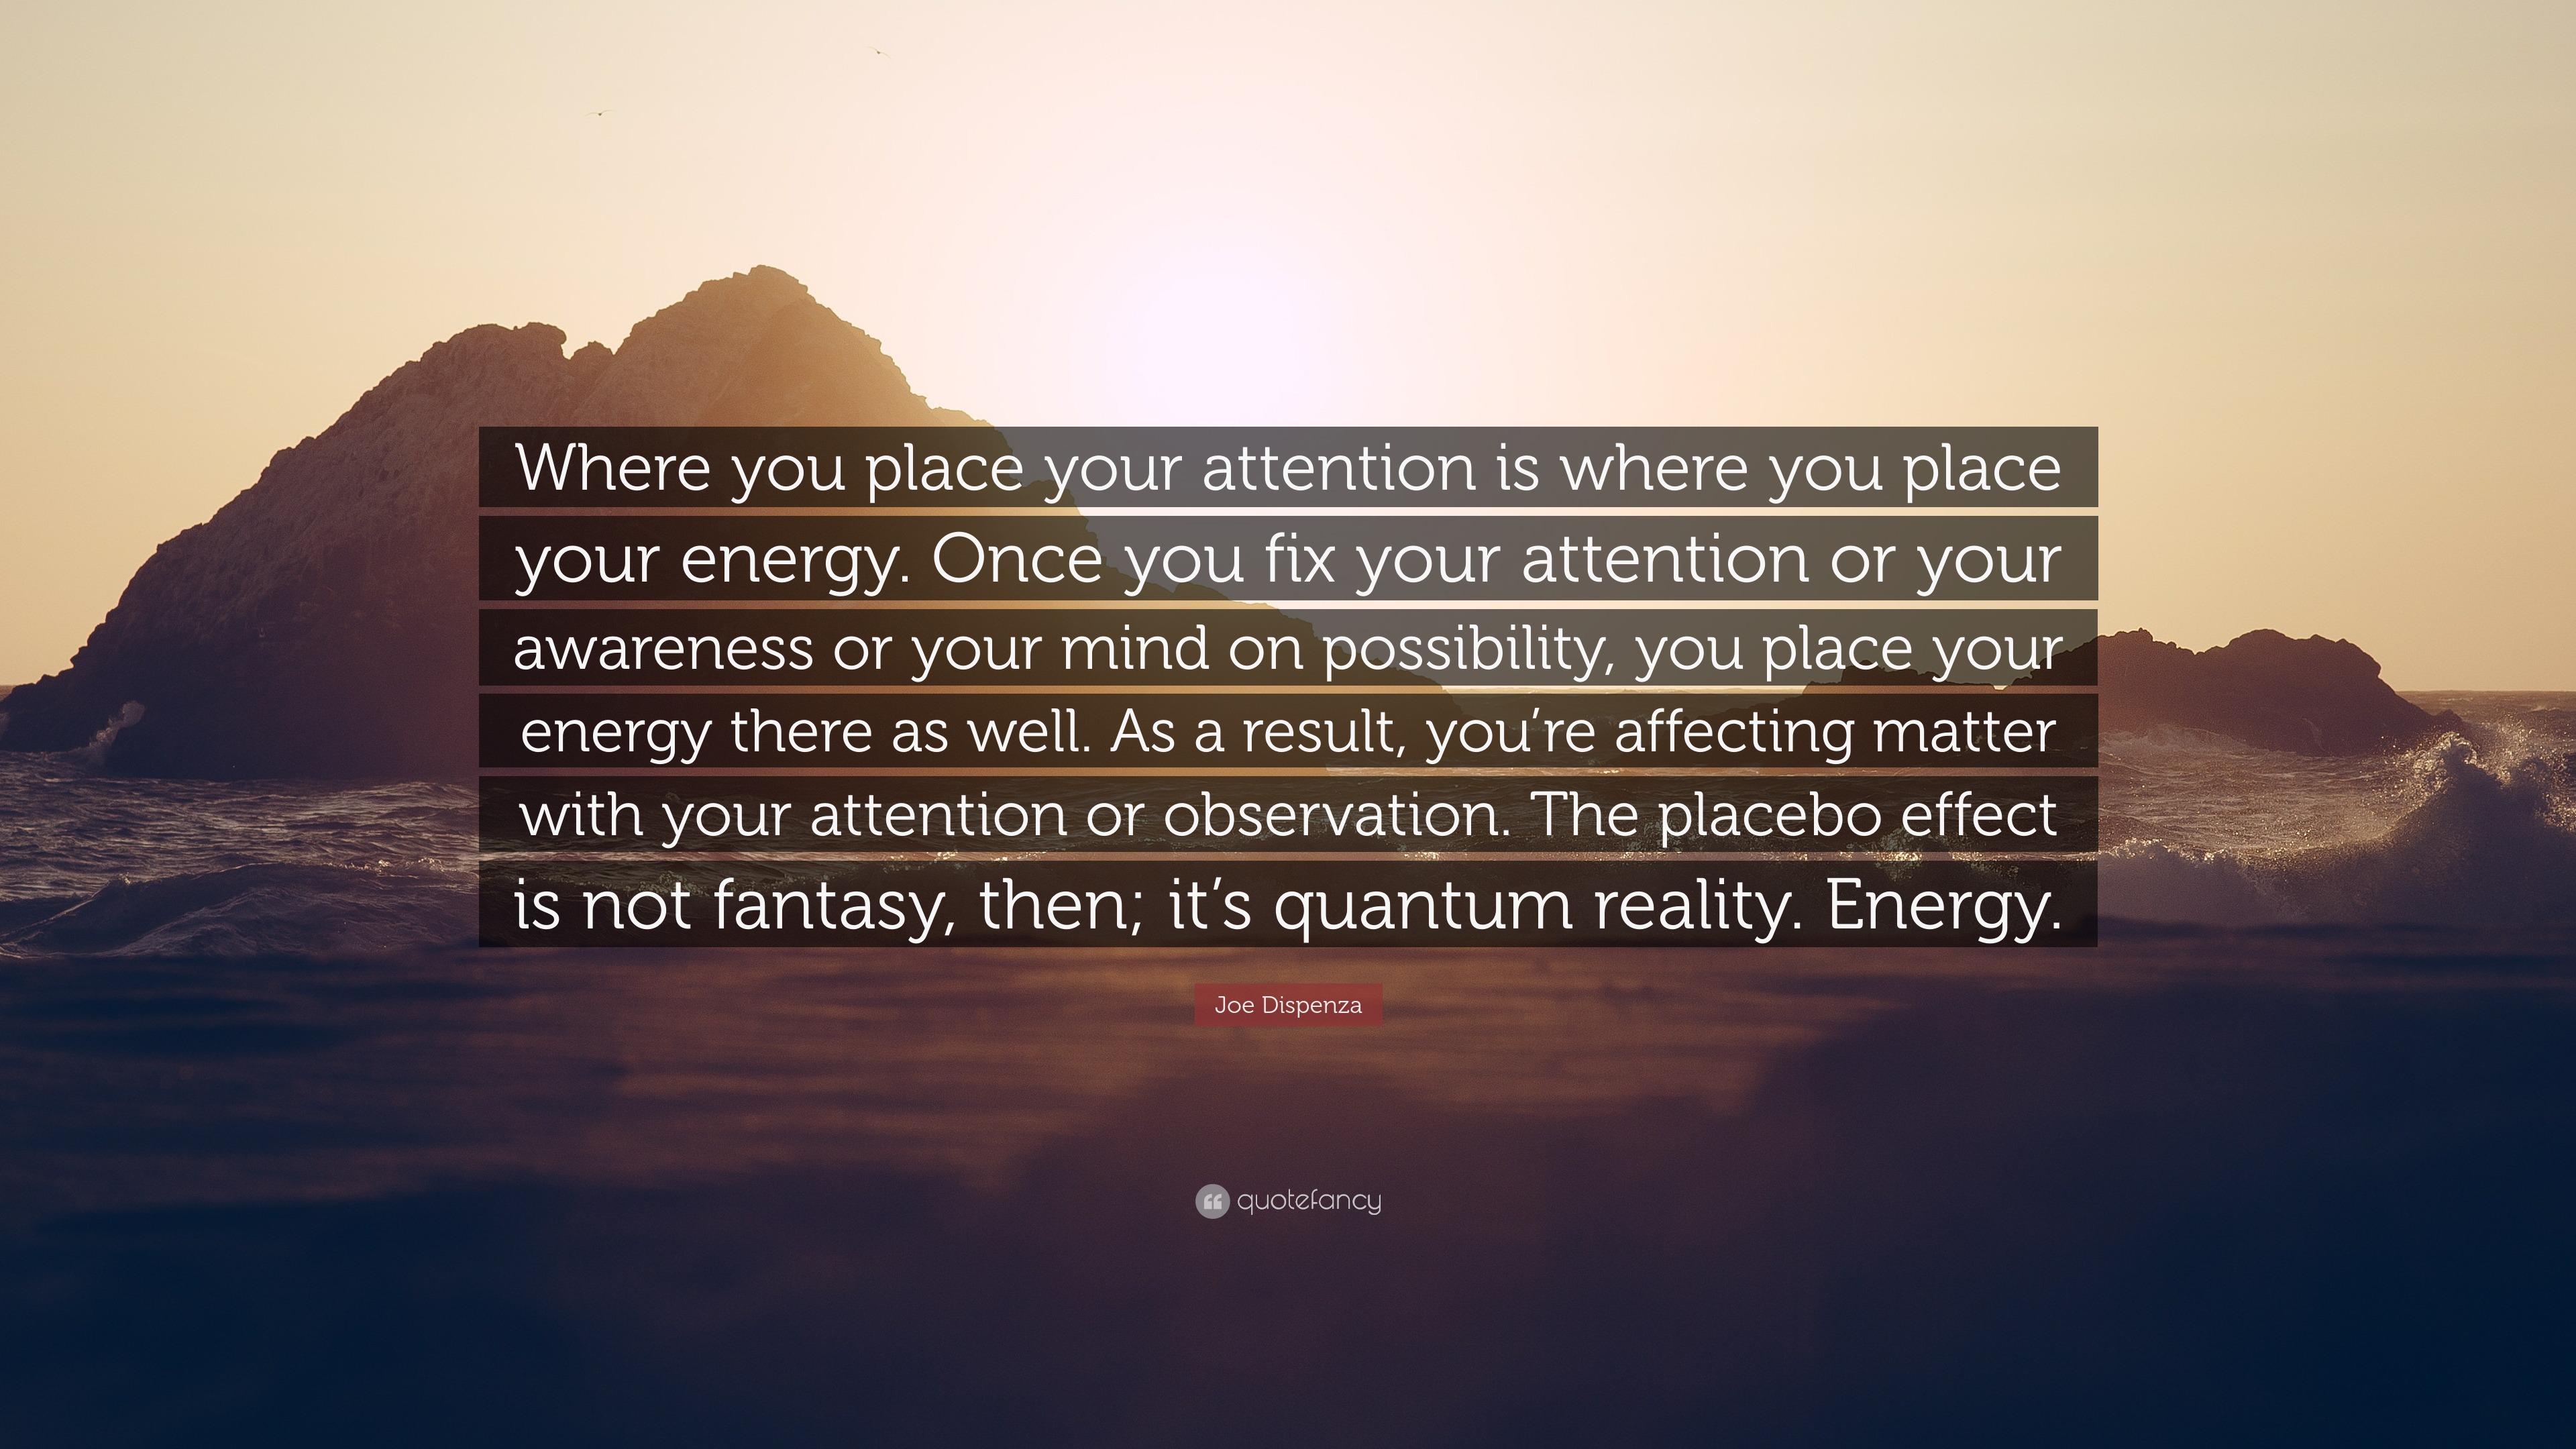 Joe Dispenza Quote: “Where you place your attention is where you